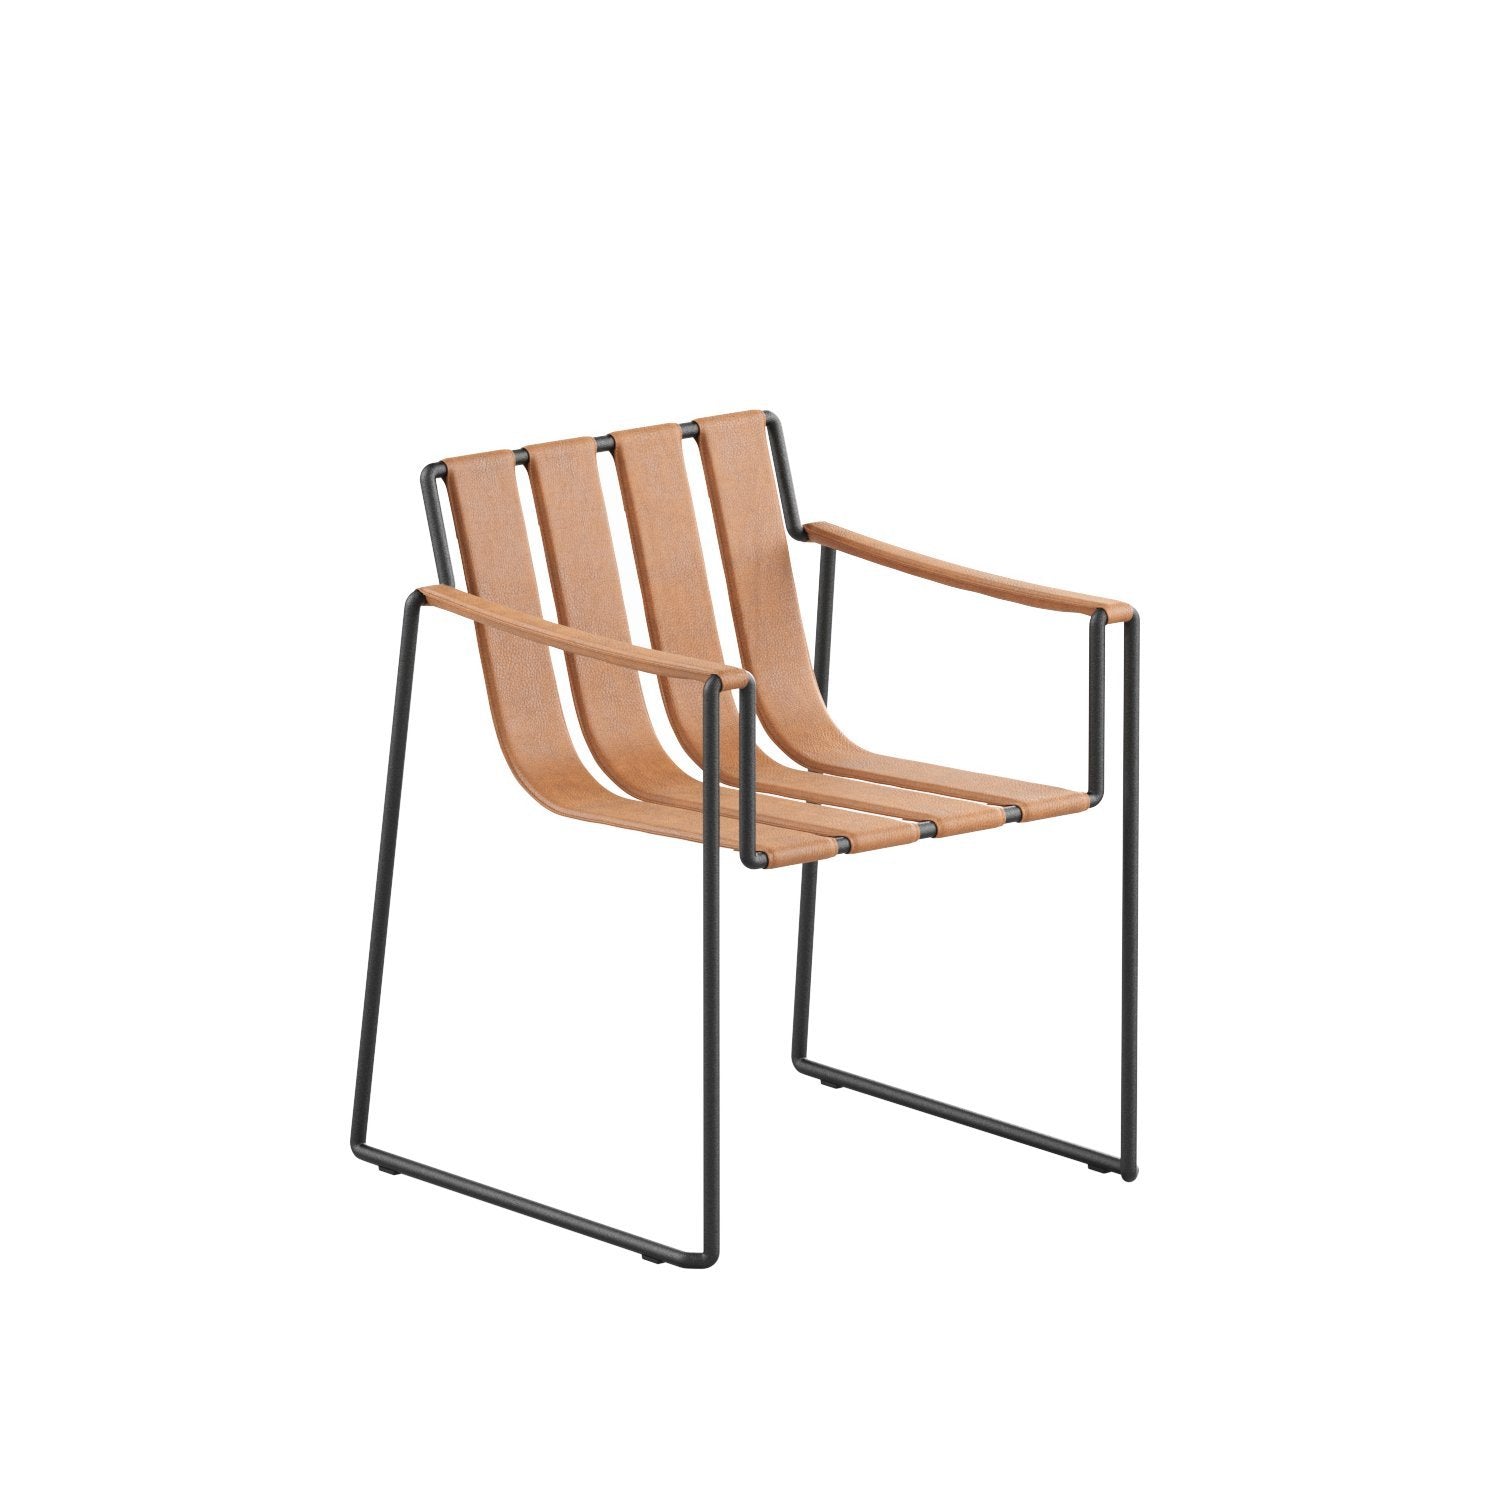 Strappy 55 chair in cognac